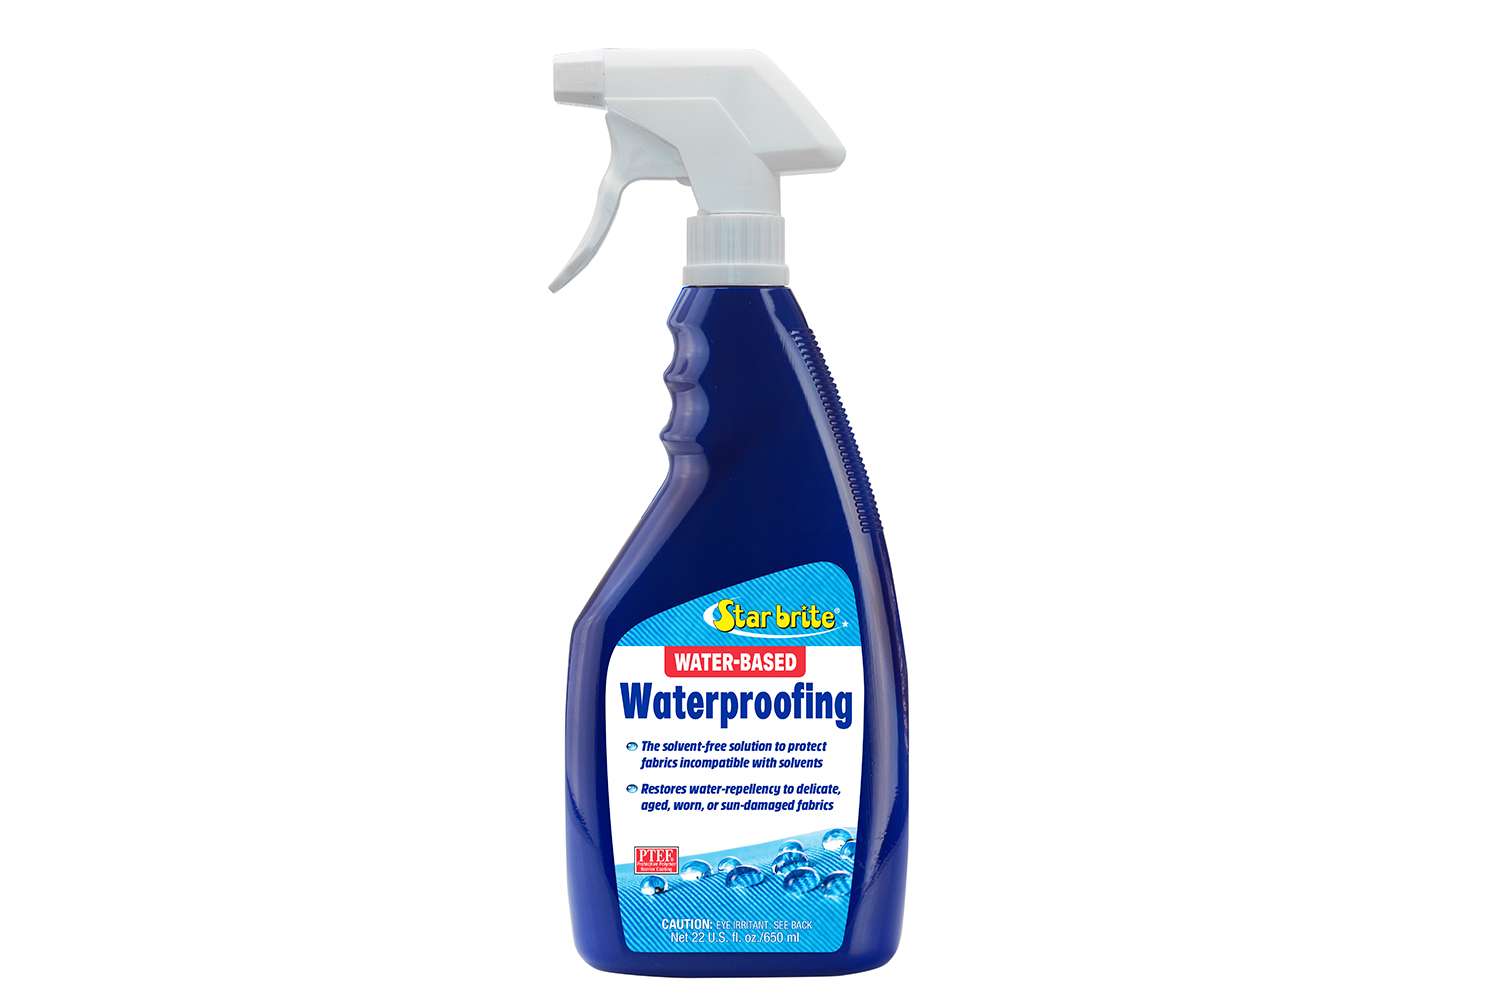 <p><b>Star brite Water-based Waterproofing - 82222</b></p>
<p>Water-based Waterproofing adds and restores water repellency to new, delicate, aged, worn, or sun-damaged fabrics. Use on boat tops, covers, cushions, and other outdoor fabrics. The unique solvent-free, water-based formula is low-odor, and can be used while the boat is in or near the water. It is also ideal for protecting outdoor gear. Non-PFOA contributing.</p>
<p><a href=